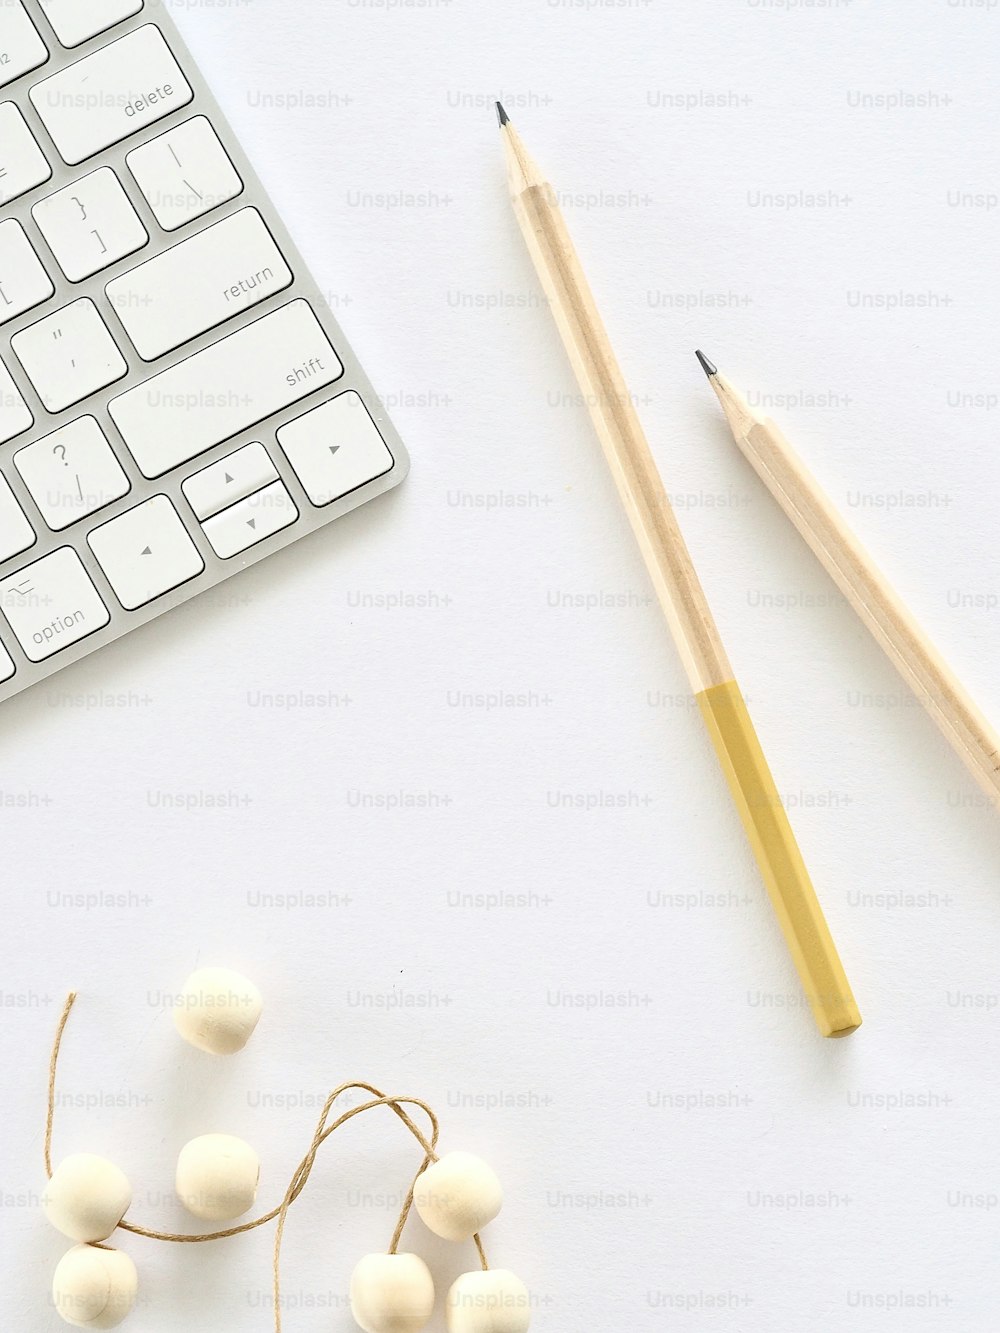 a keyboard, pencils, and some cotton balls on a desk